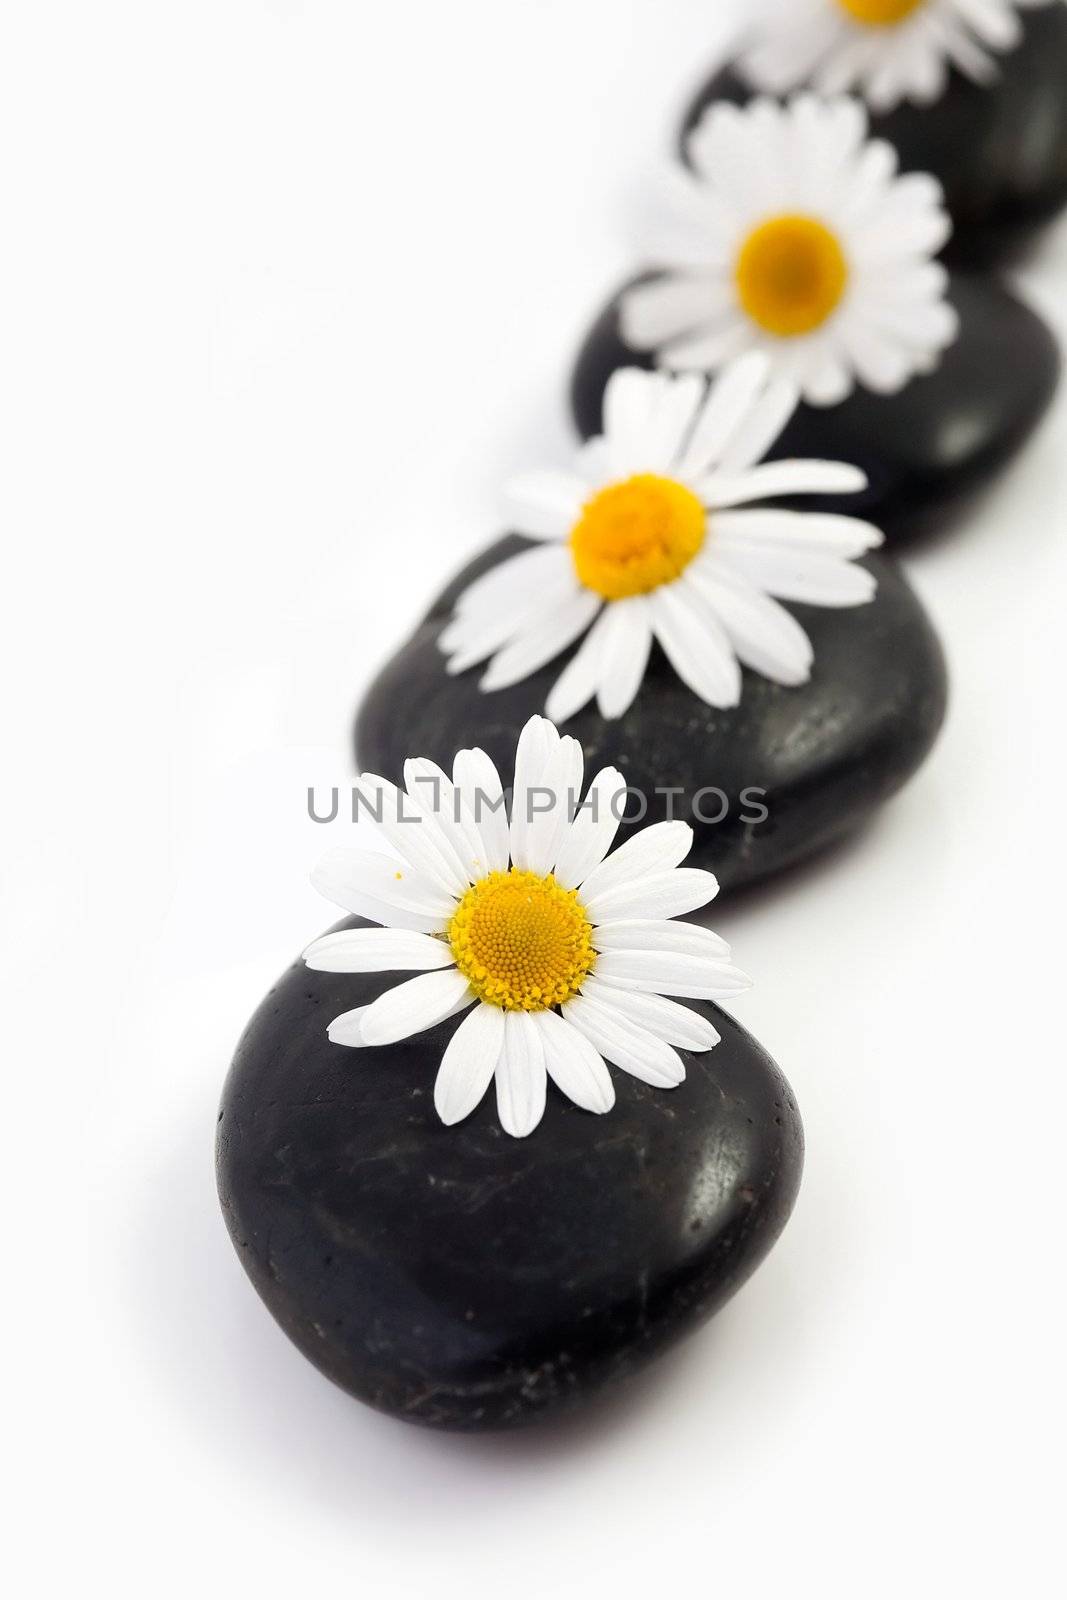 An image of white flowers on black stones